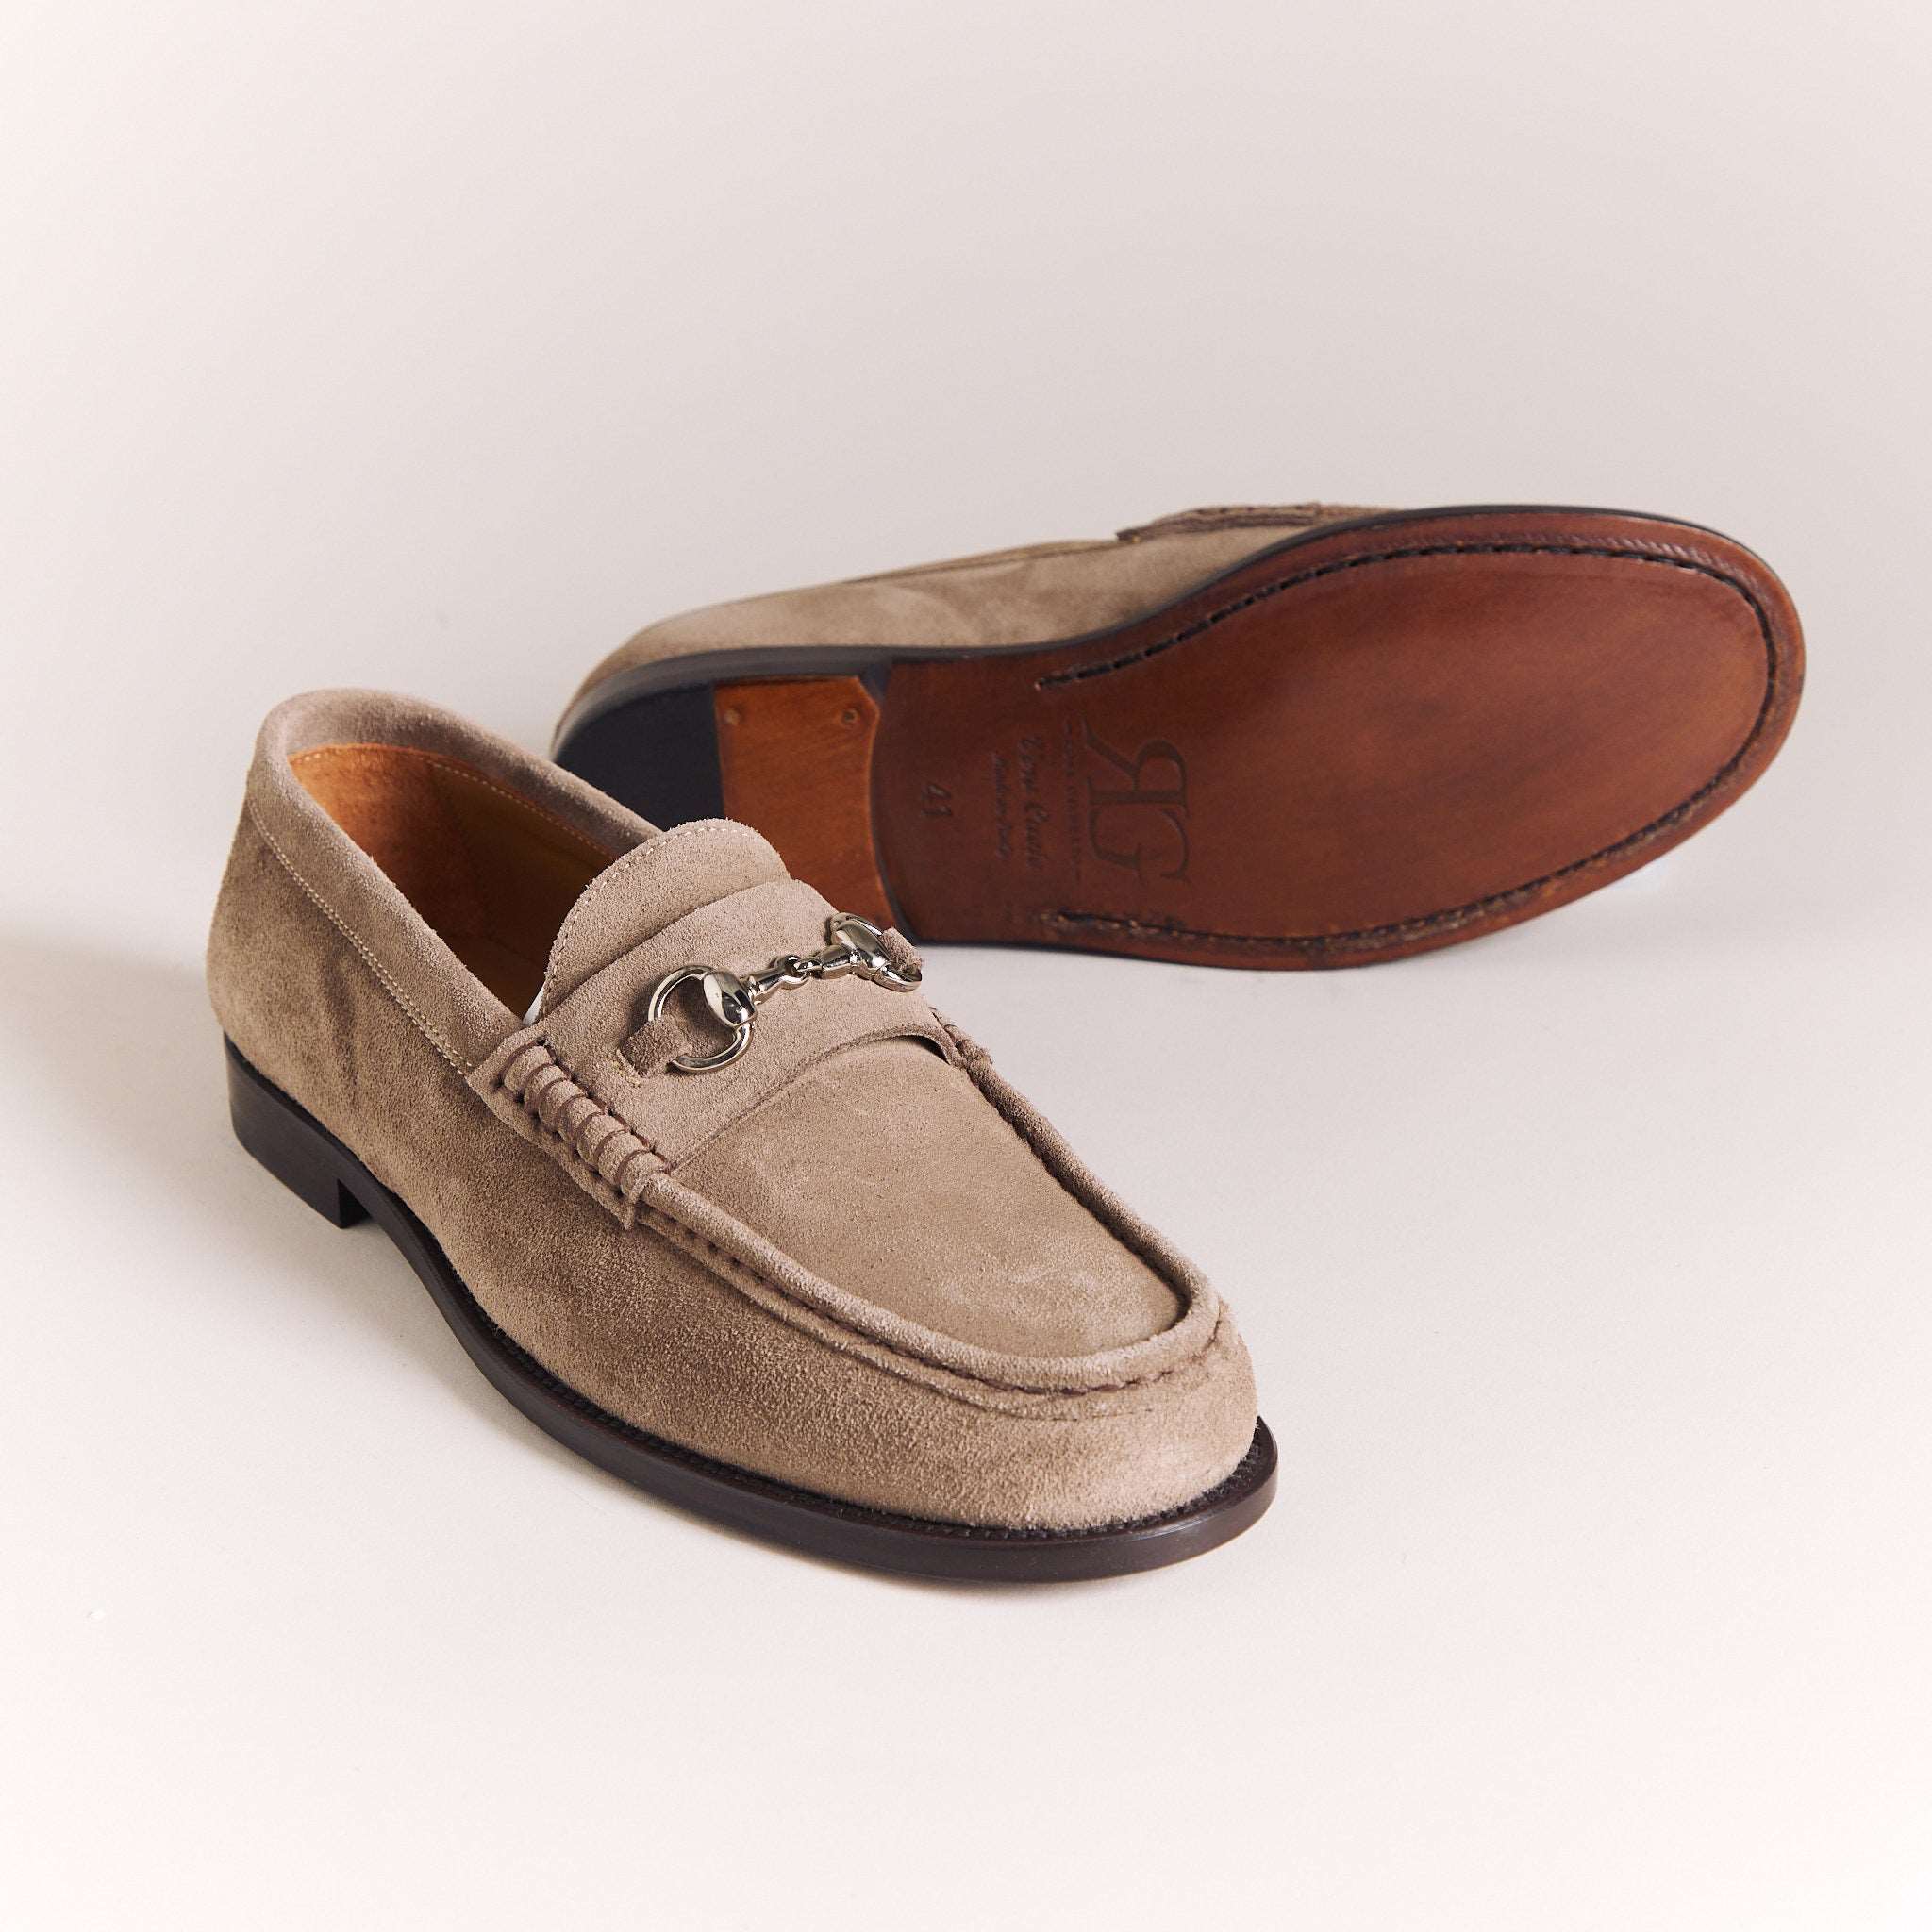 Italian Loafers for Men | Taupe Suede 'Lorenzo' Moccasins